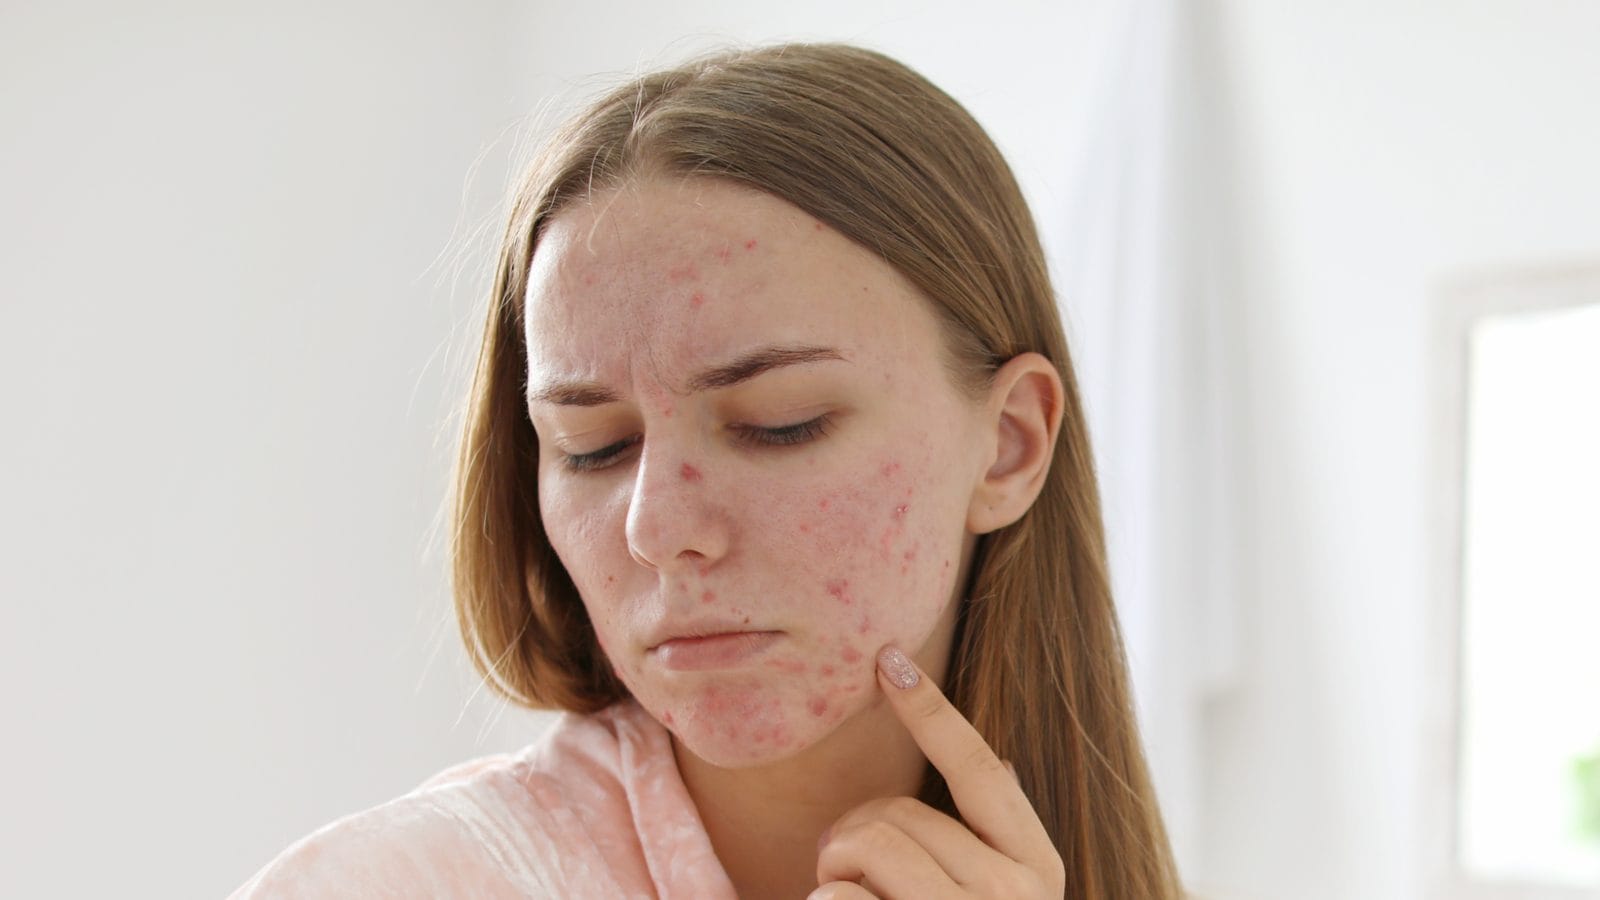 Are You Dealing With Acne? Here Are 4 Skin Tips For Clear And Smooth Skin